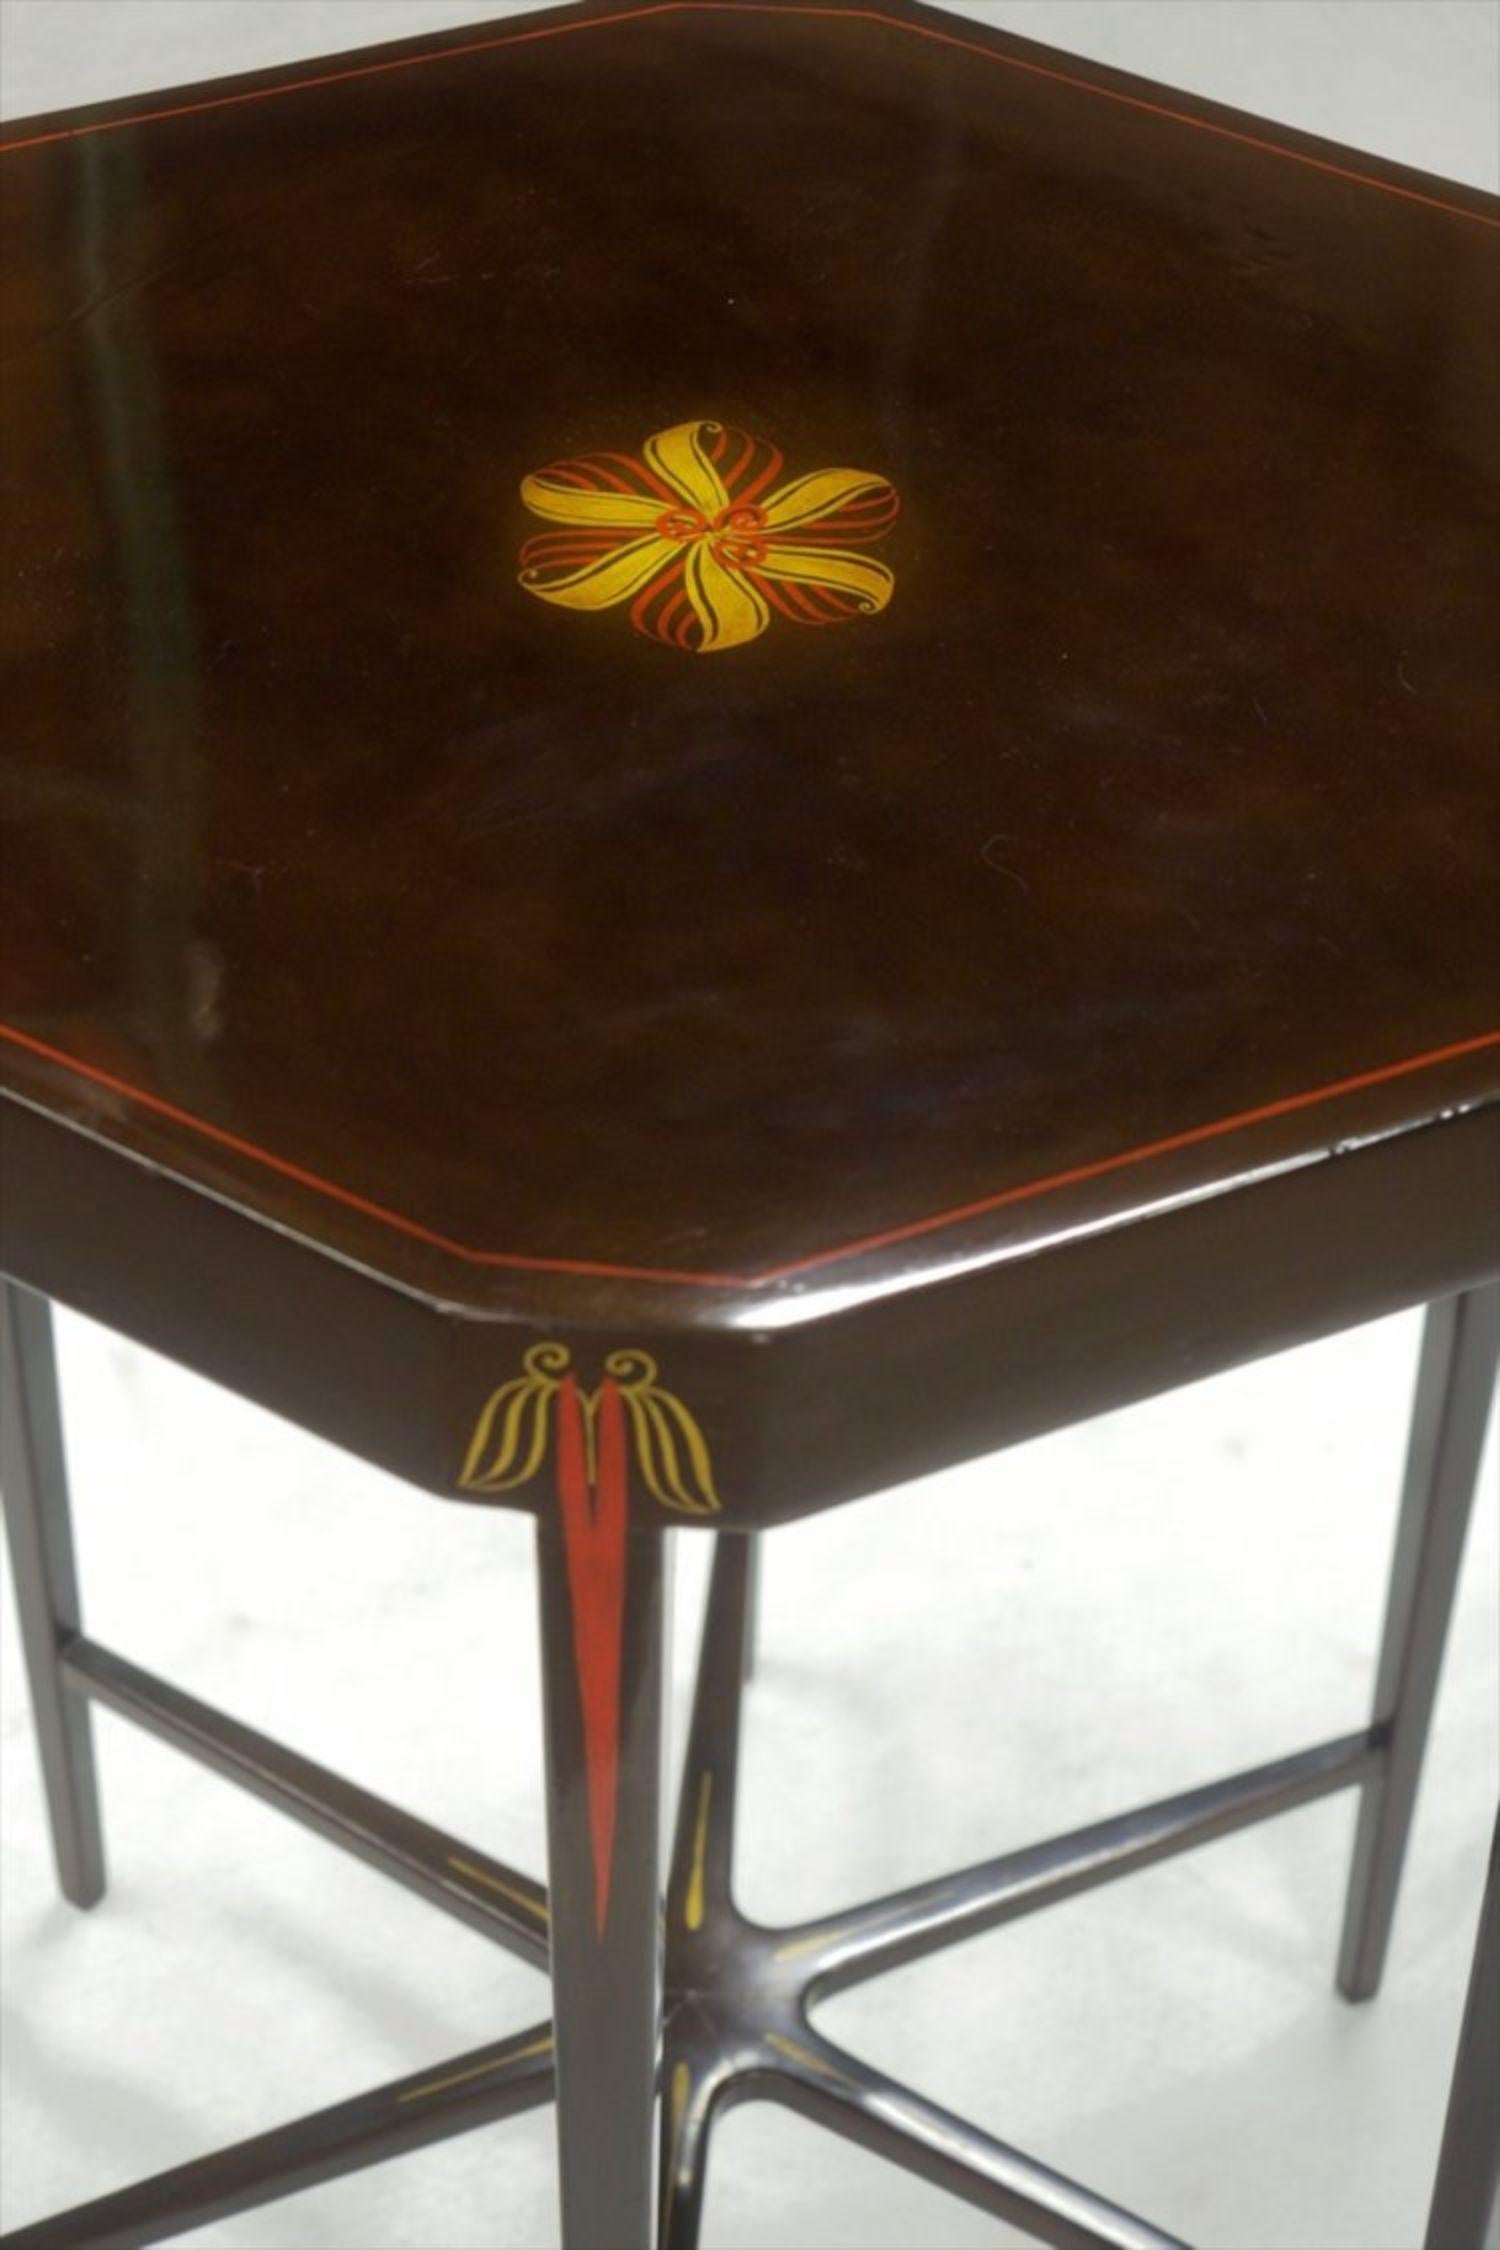 Early Classic French Art Deco side table, circa 1920. Original dark tobacco-colored lacquer with red and gold lacquer decoration. Measures: 23